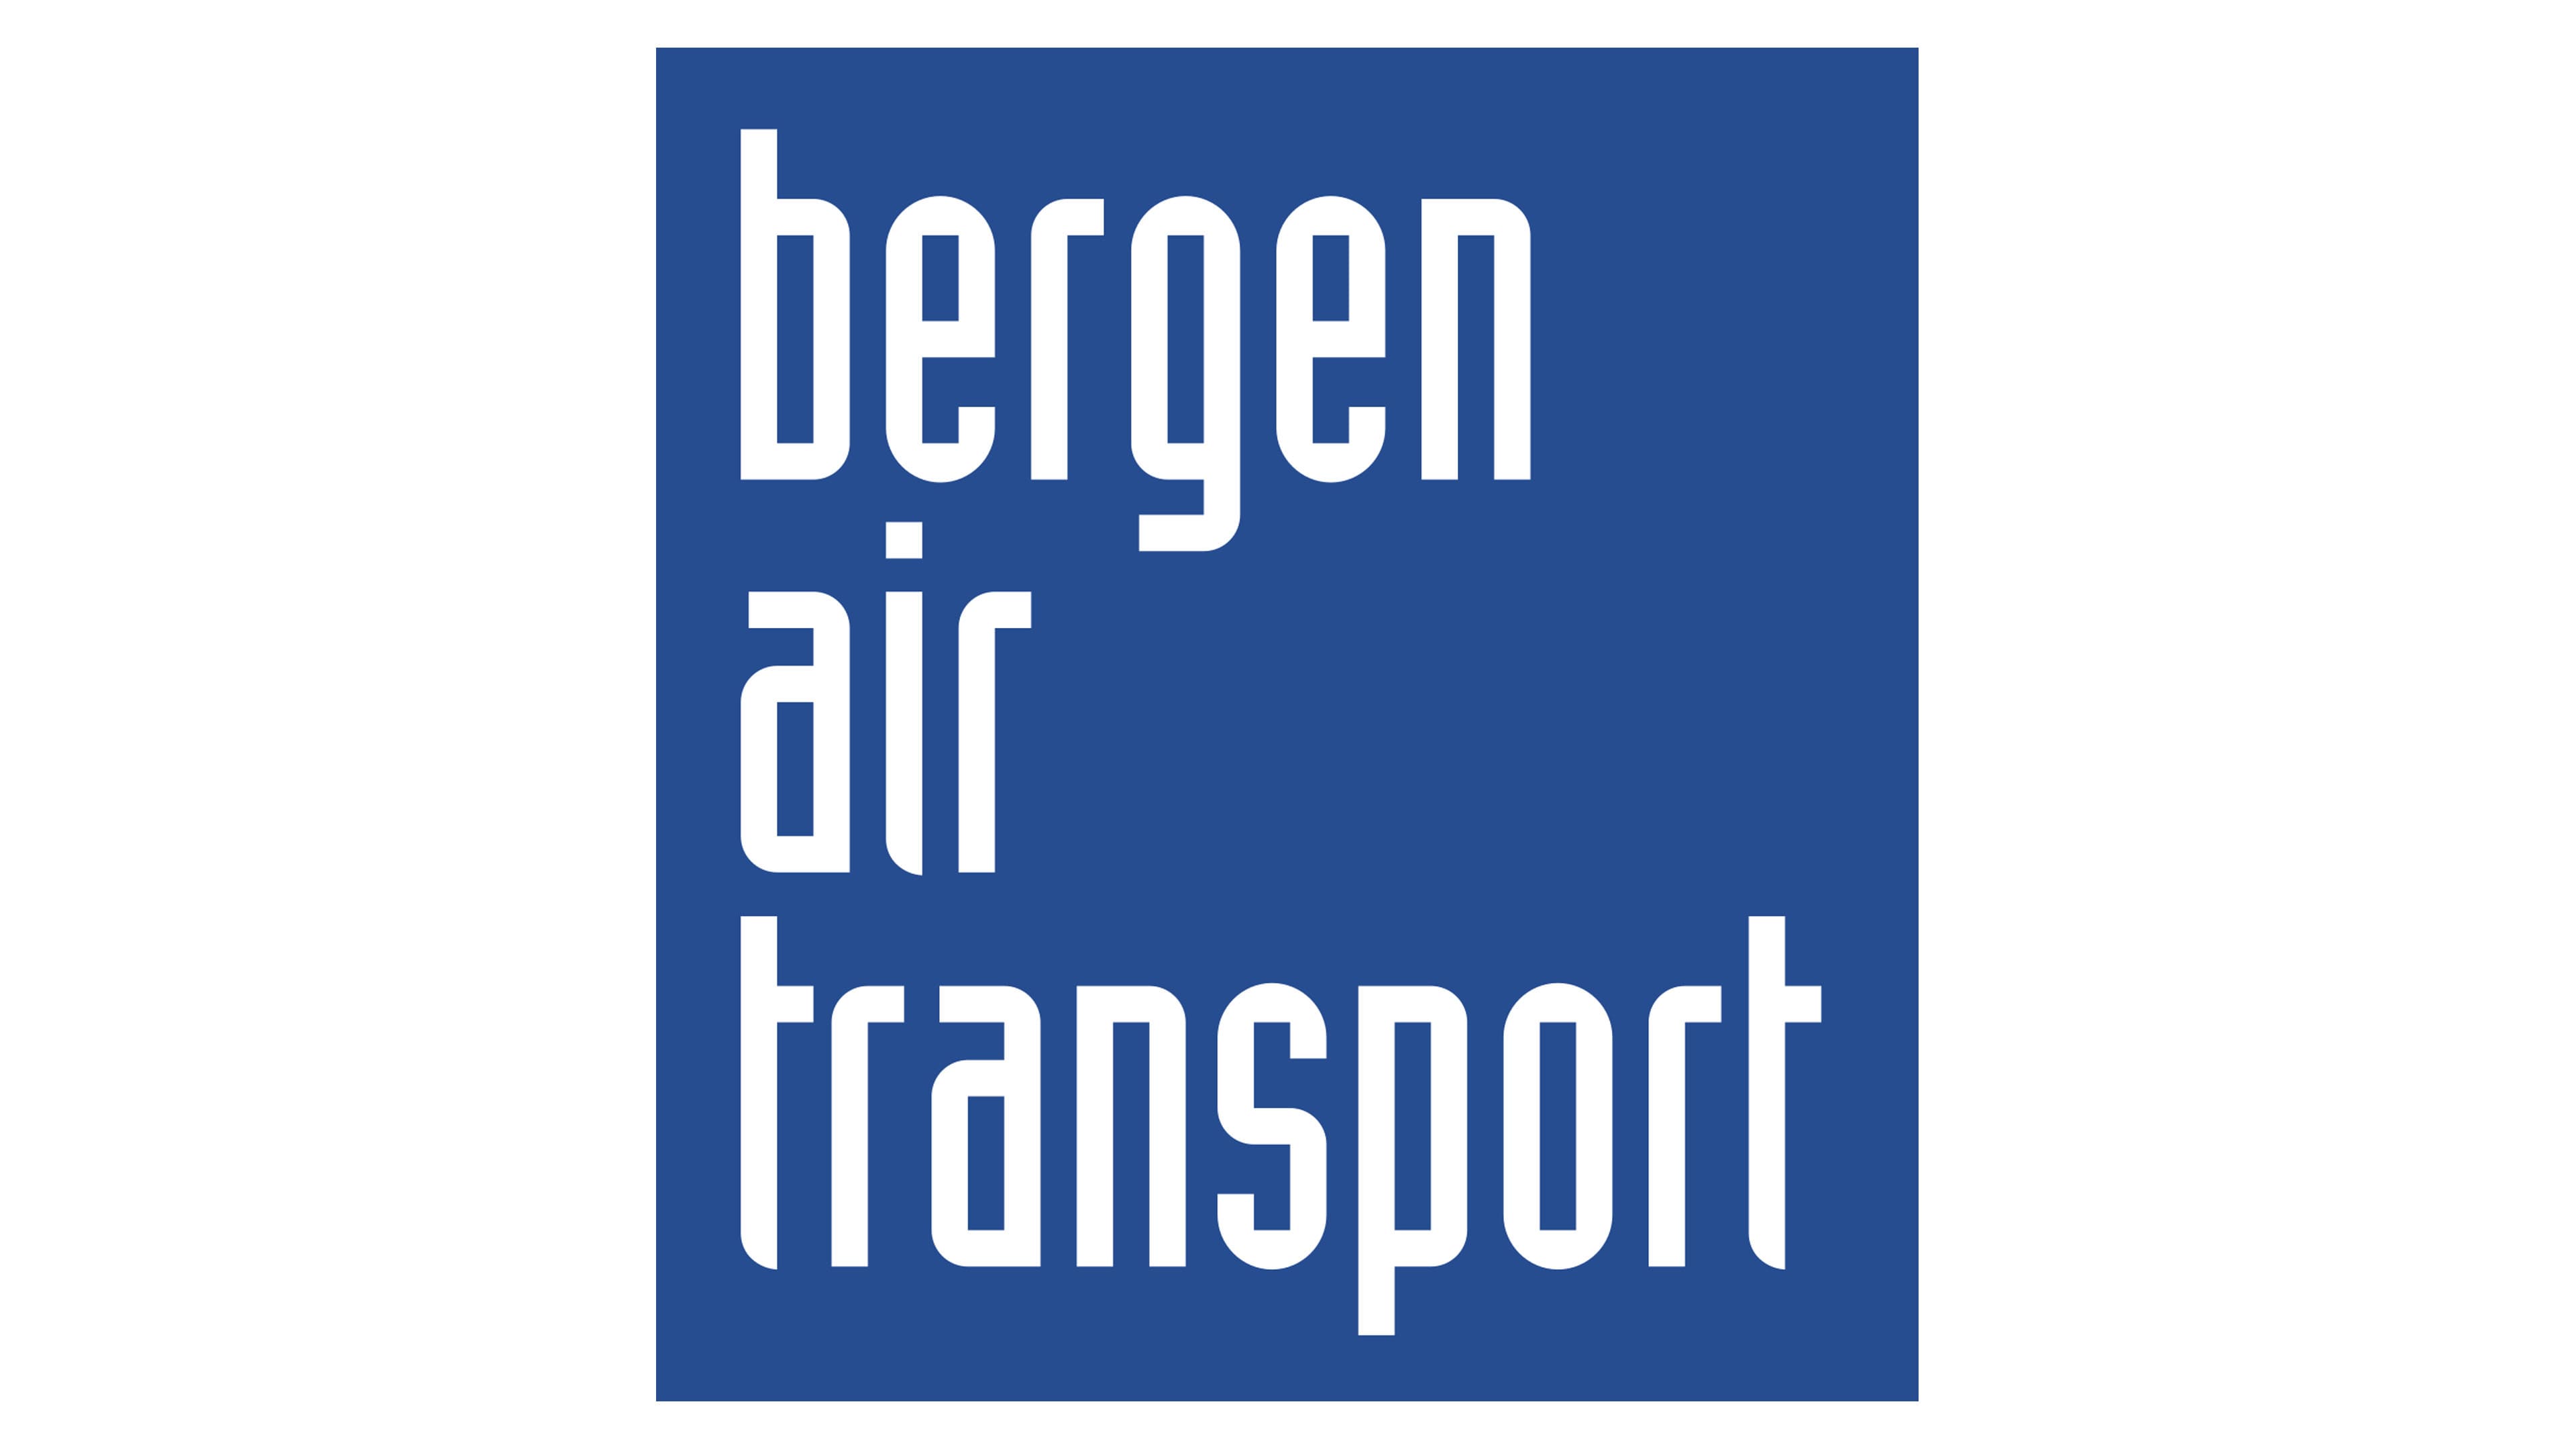 Bergen Air Transport Logo and symbol, meaning, history, PNG, brand